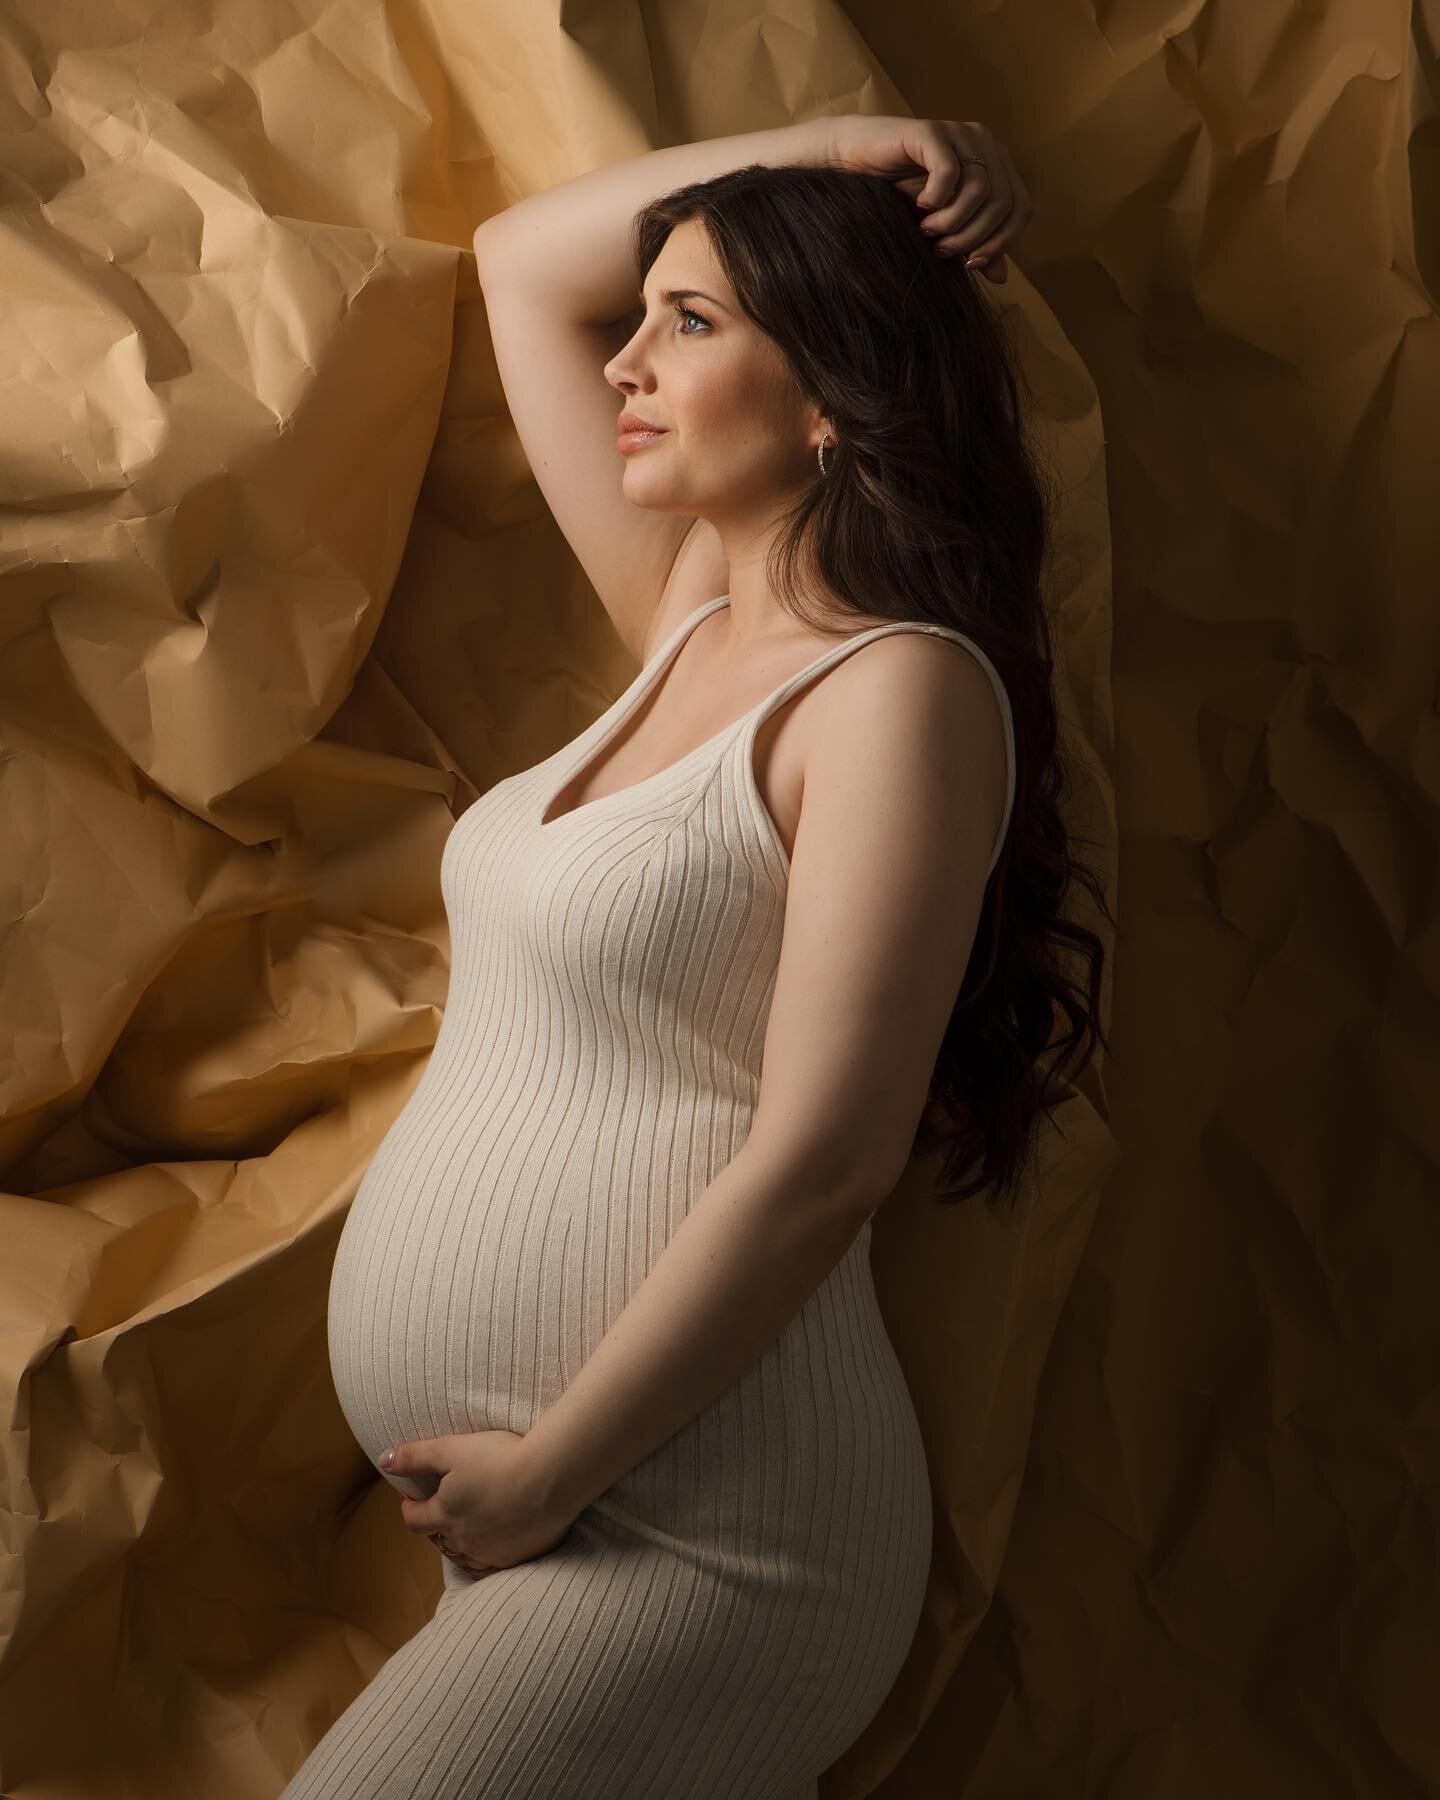 Beautiful @x_gilda_ 💛

Inspired by the one and only @lolamelani 🖤

Hair and makeup @deborahleone.makeupartist 

#babybauchshooting #pregnantandperfect #creativepregnancyphotos #dickbauchdienstag #profotob10